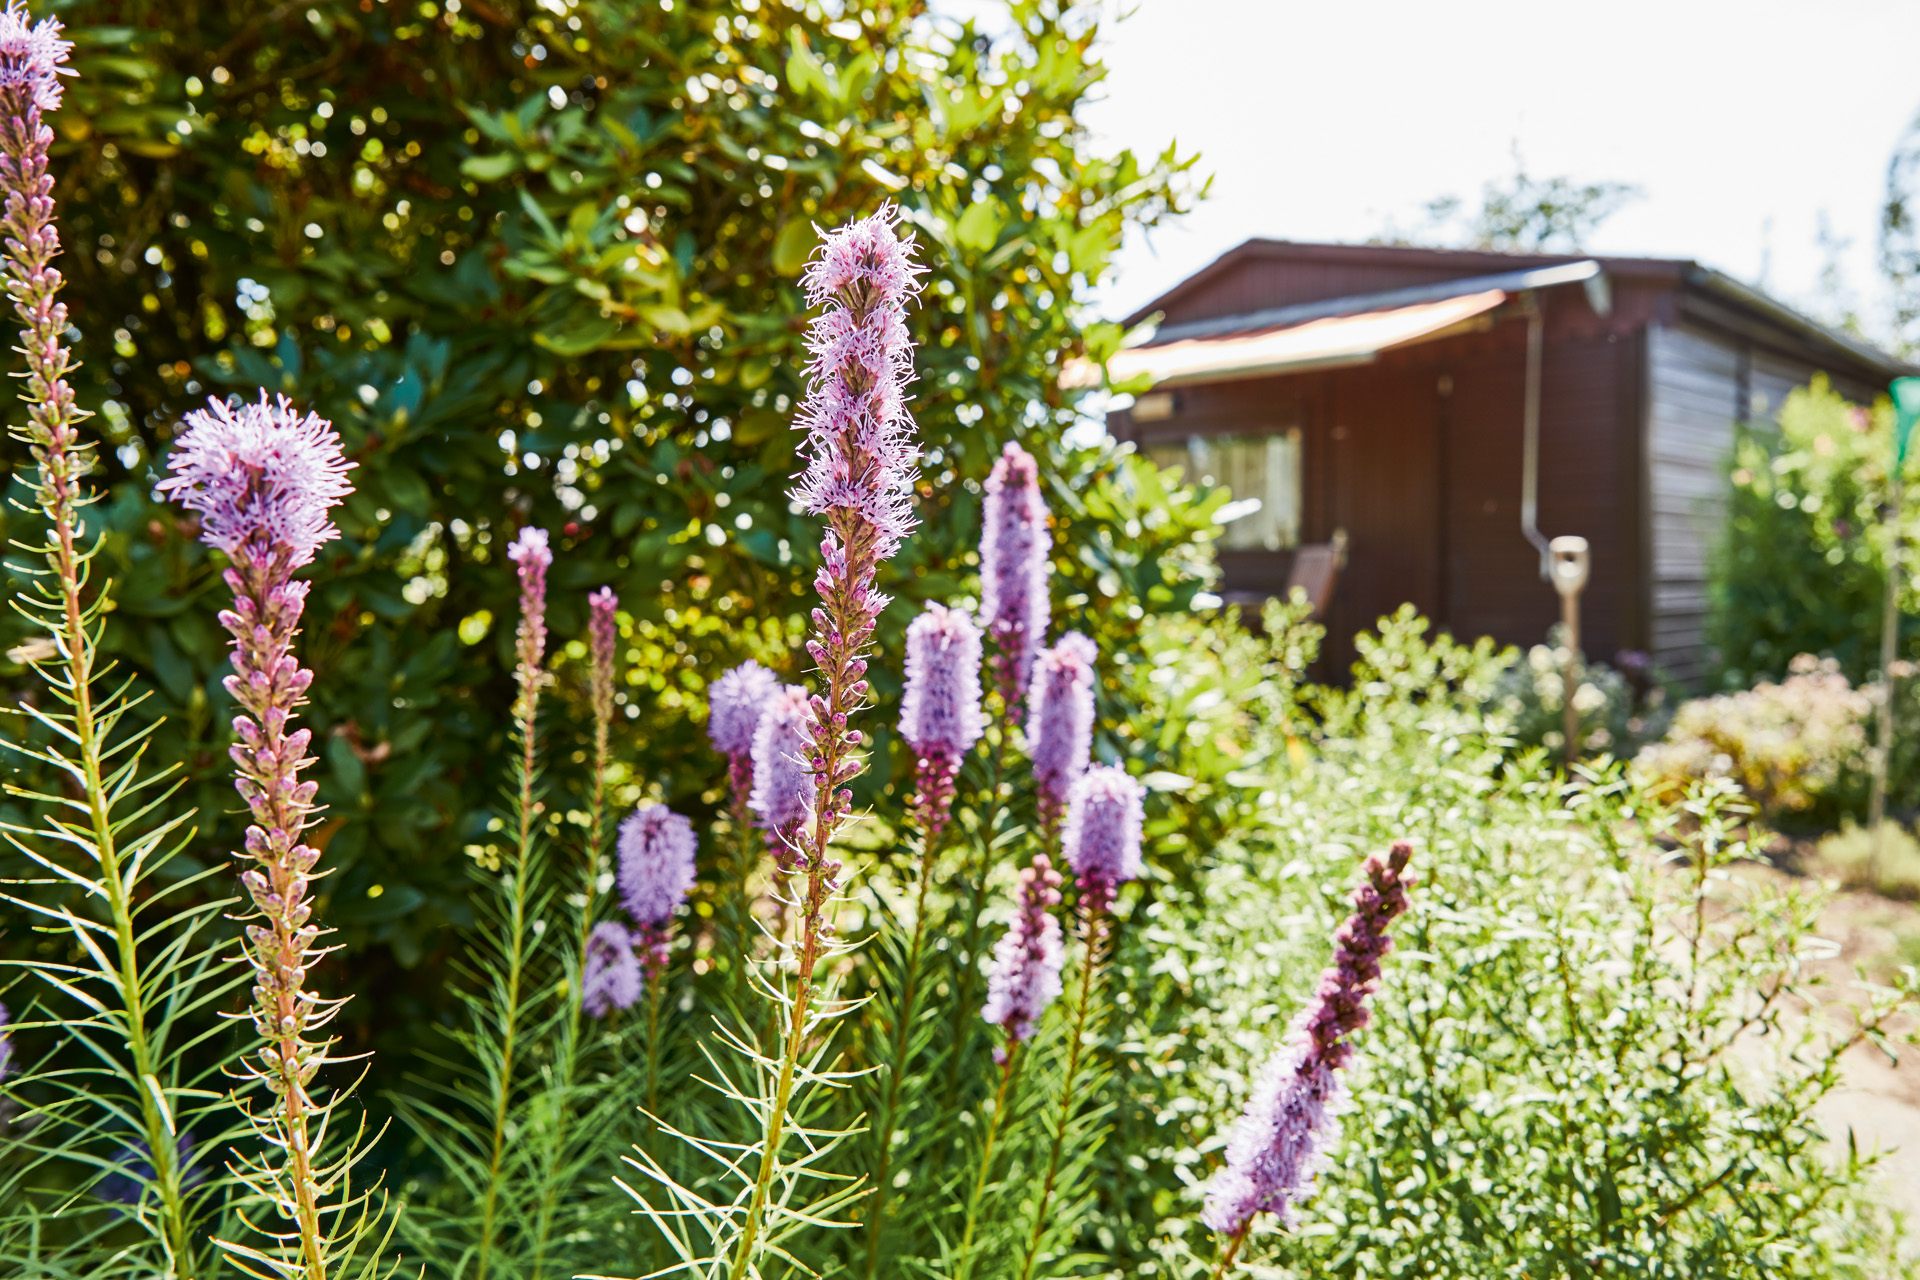 Purple perennial flowers with a garden shed with an awning in the background